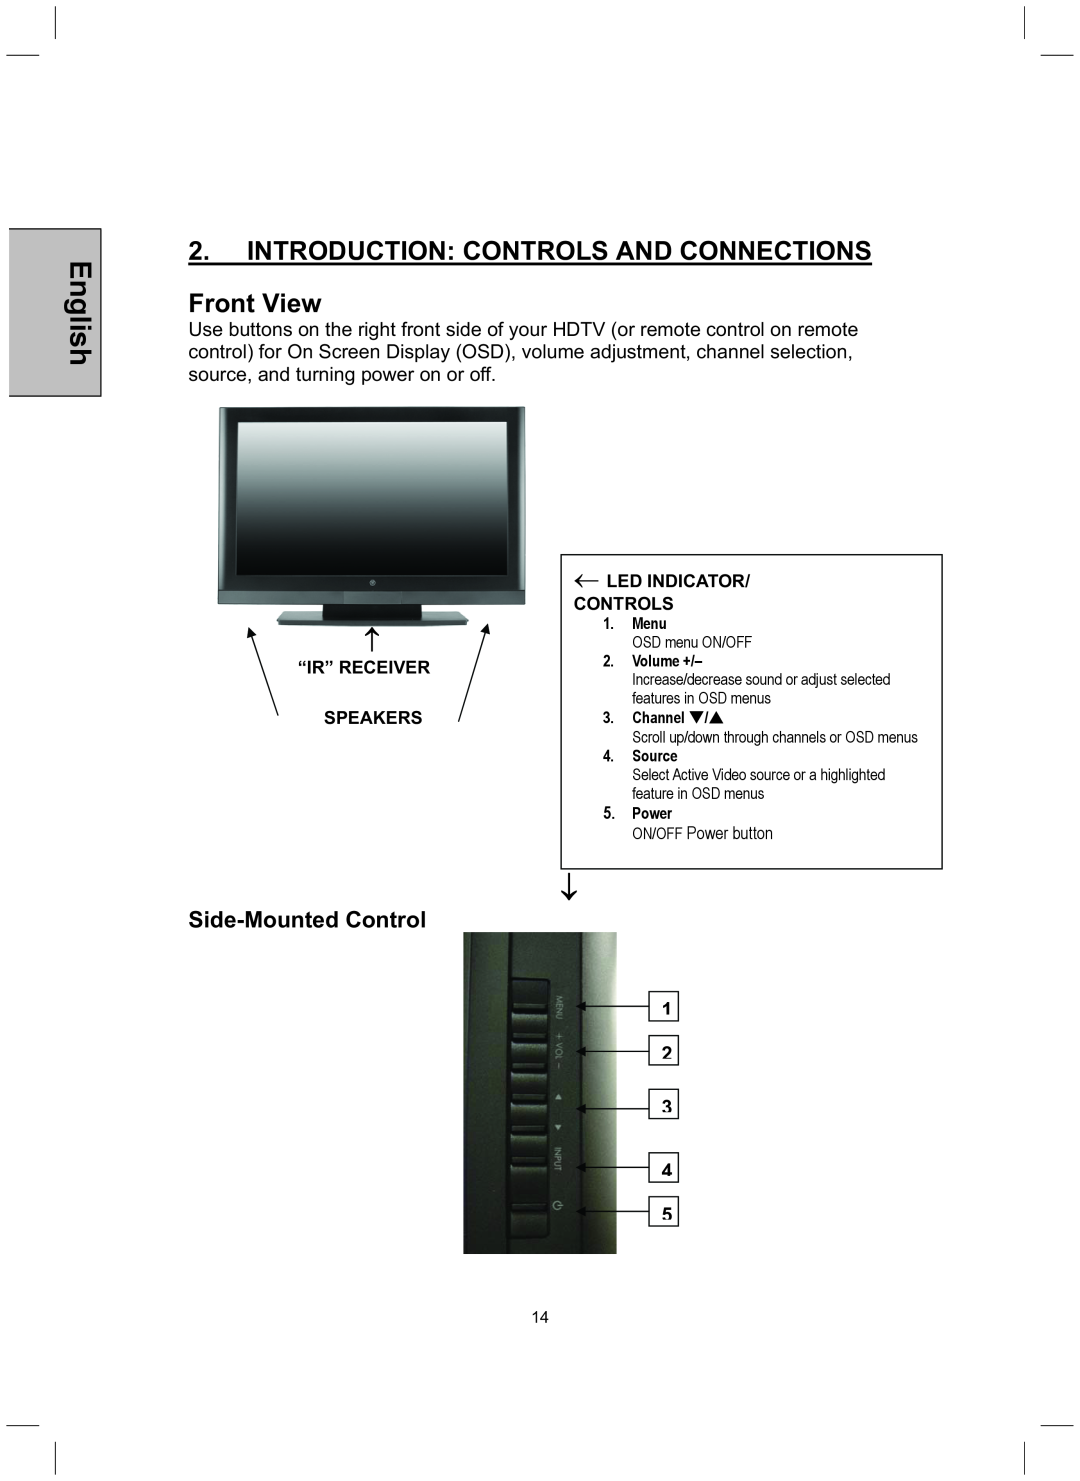 Westinghouse TX-52H480S user manual INTRODUCTION CONTROLS AND CONNECTIONS Front View, Side-Mounted Control, English 